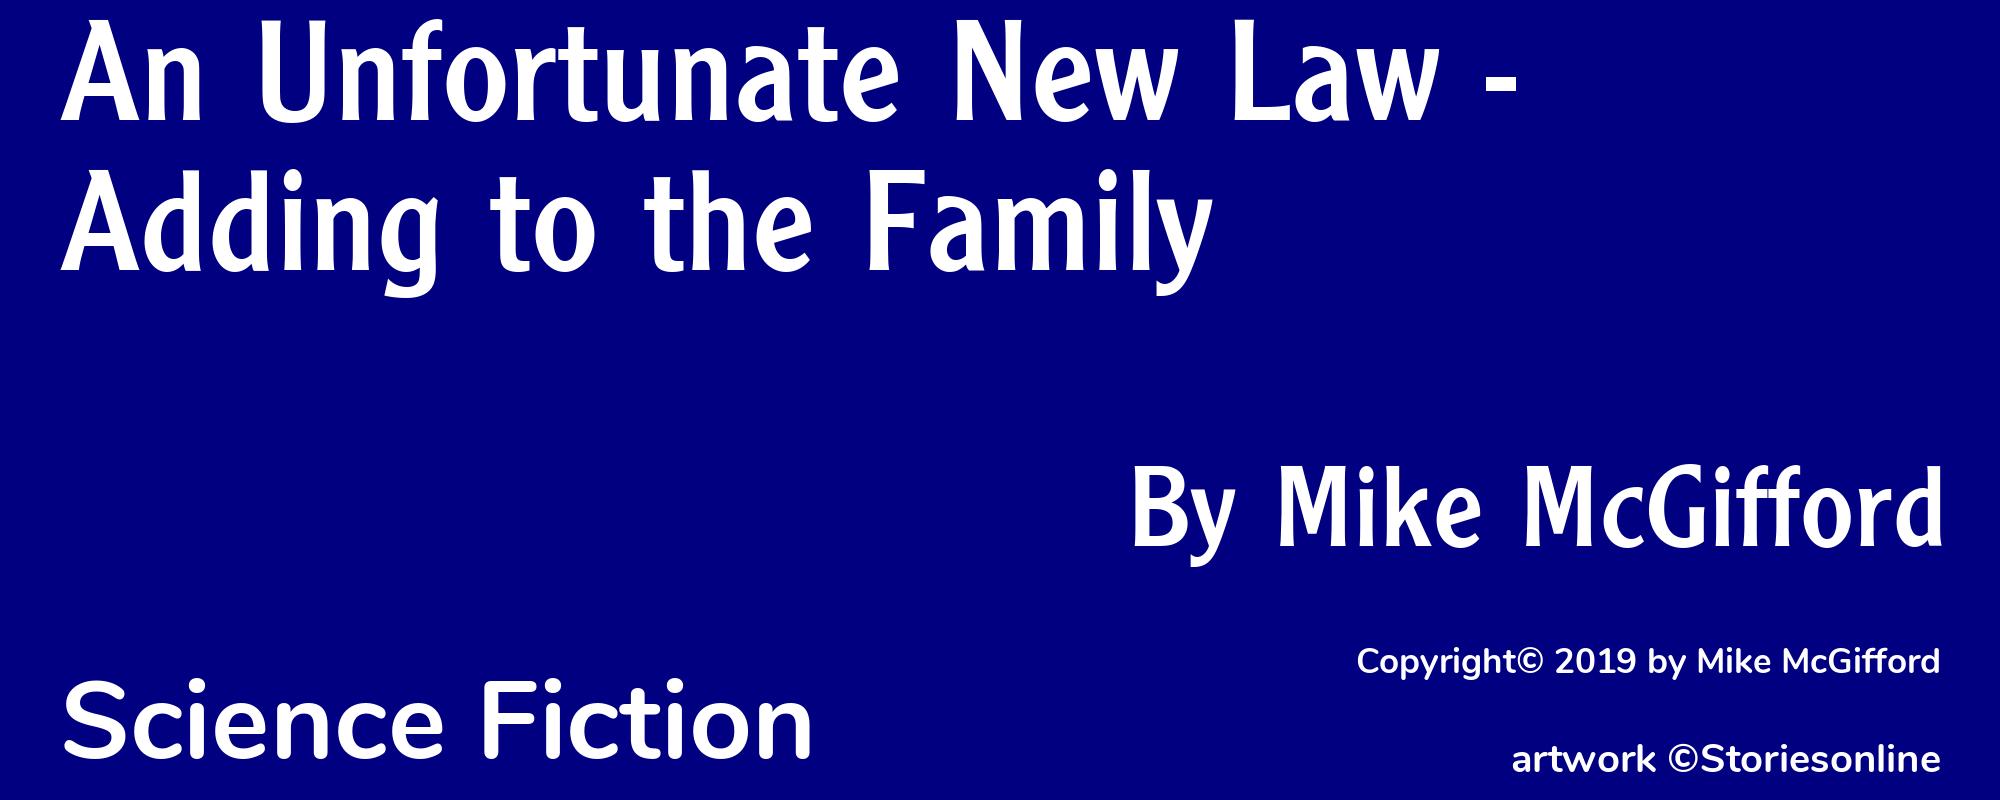 An Unfortunate New Law - Adding to the Family - Cover